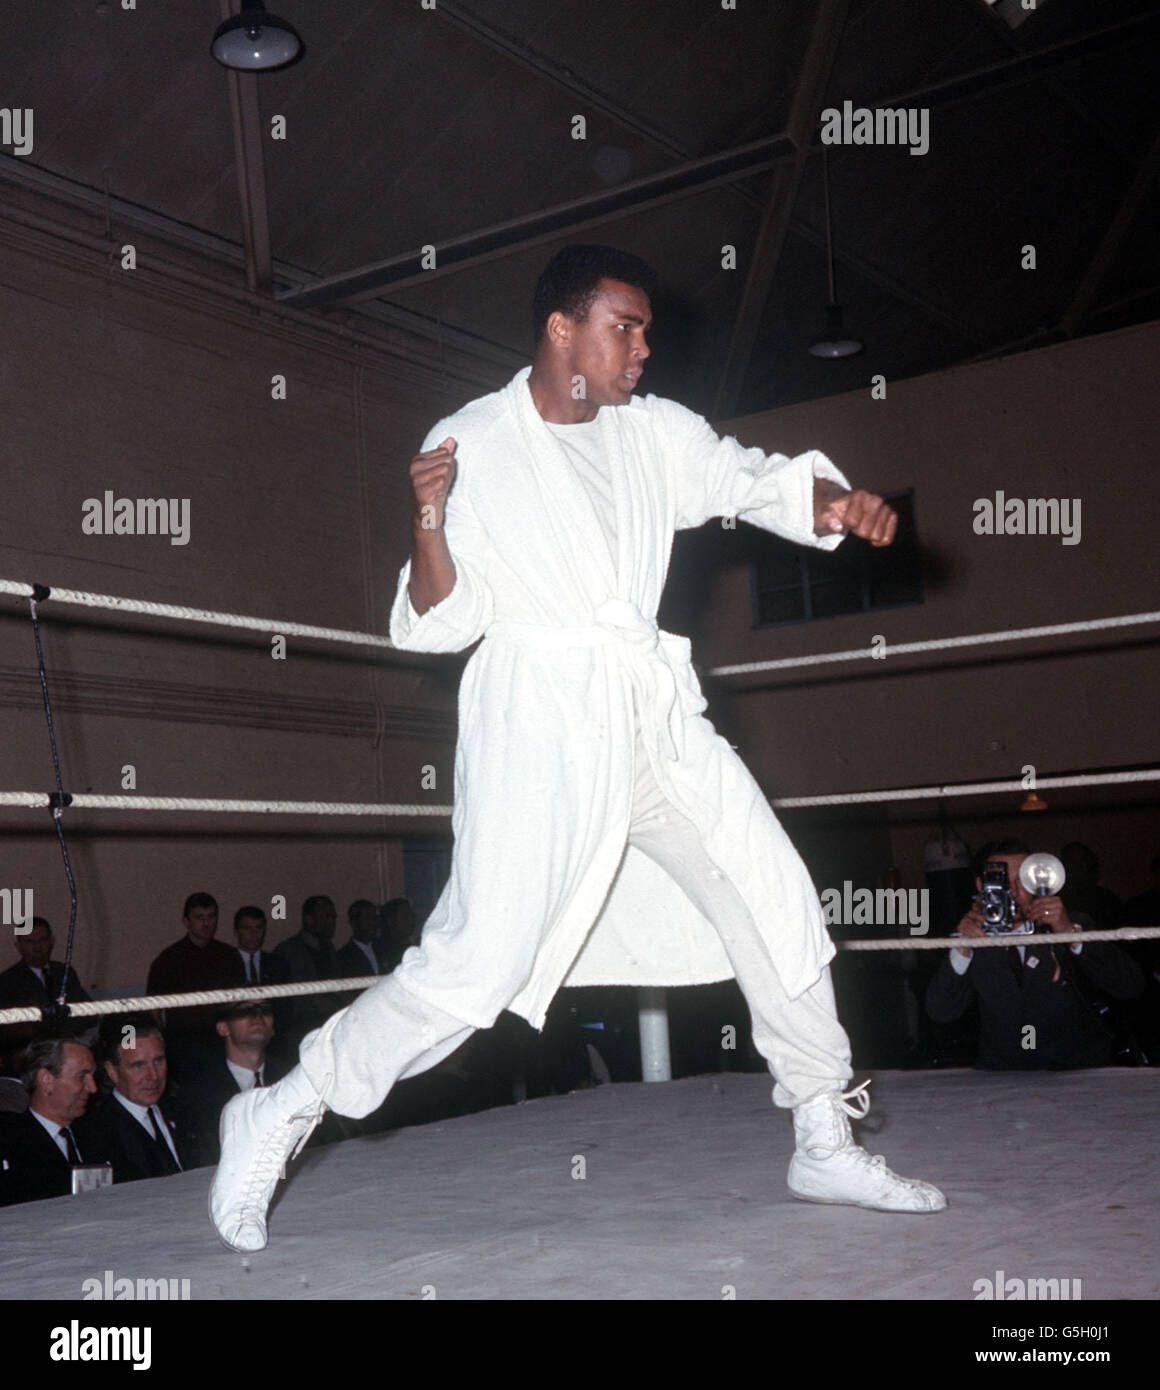 World heaveyweight champion Muhammad Ali ( Cassius Clay ) shadow boxing in the ring during training at the White City drill hall, London, for the defence of his title against Henry Cooper. 17/01/02: Ali celebrates his 60th birthday. Stock Photo